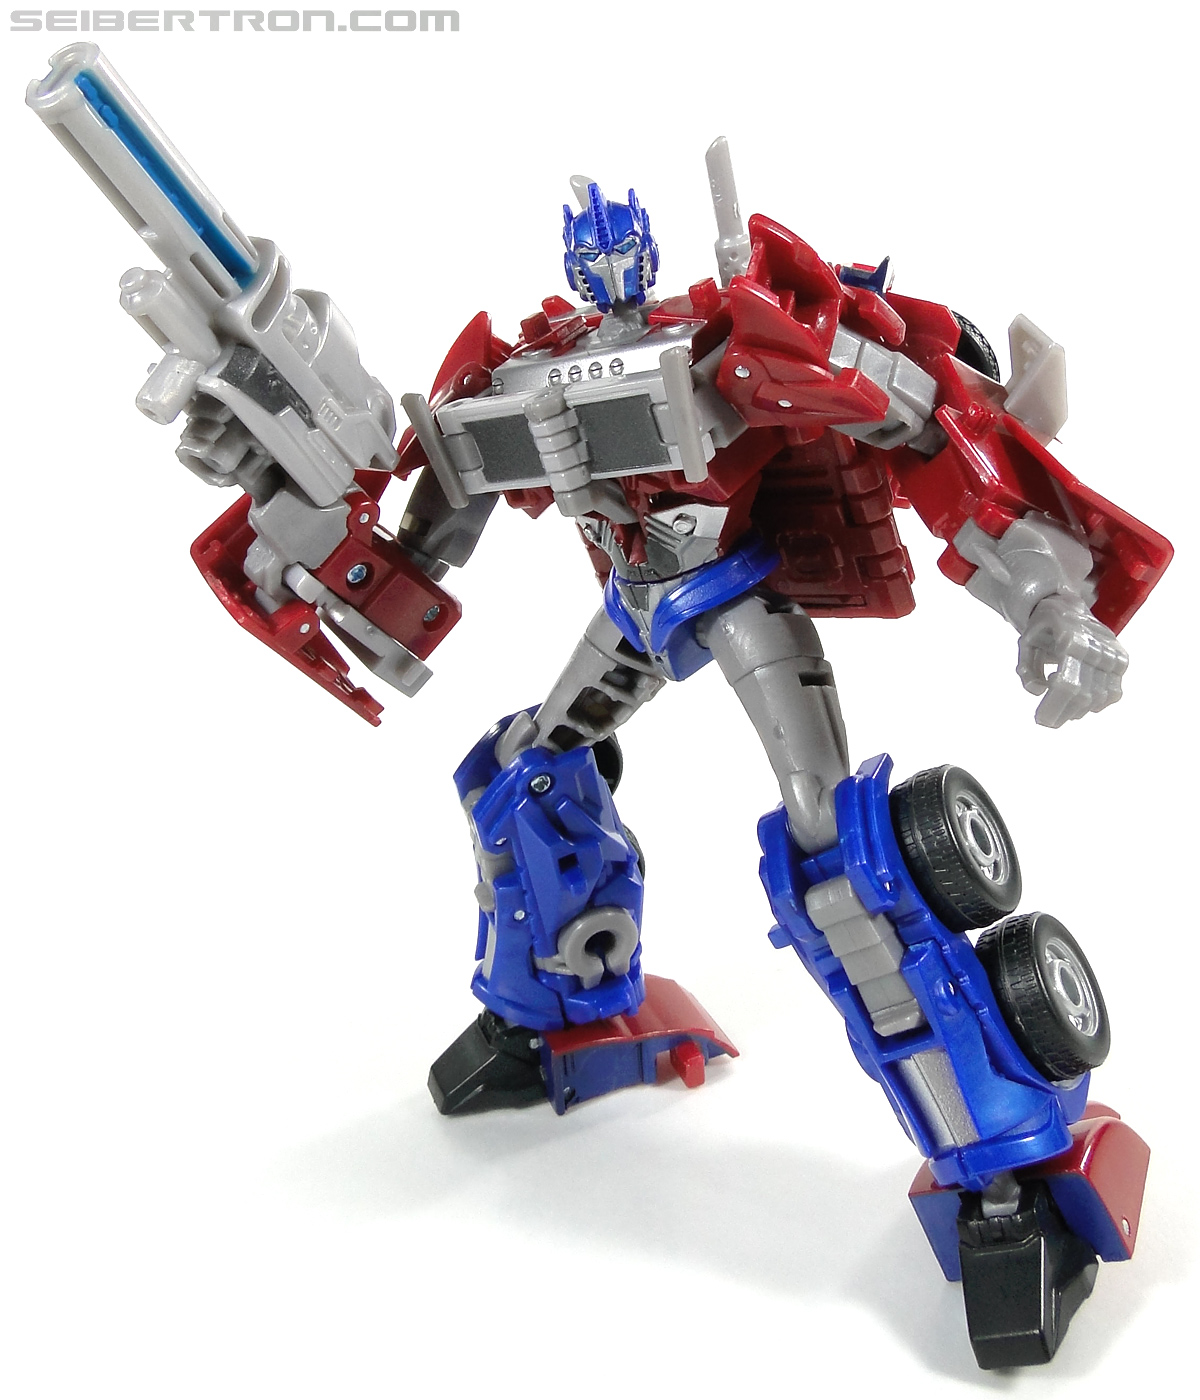 Transformers Prime: First Edition Optimus Prime (Image #119 of 170)